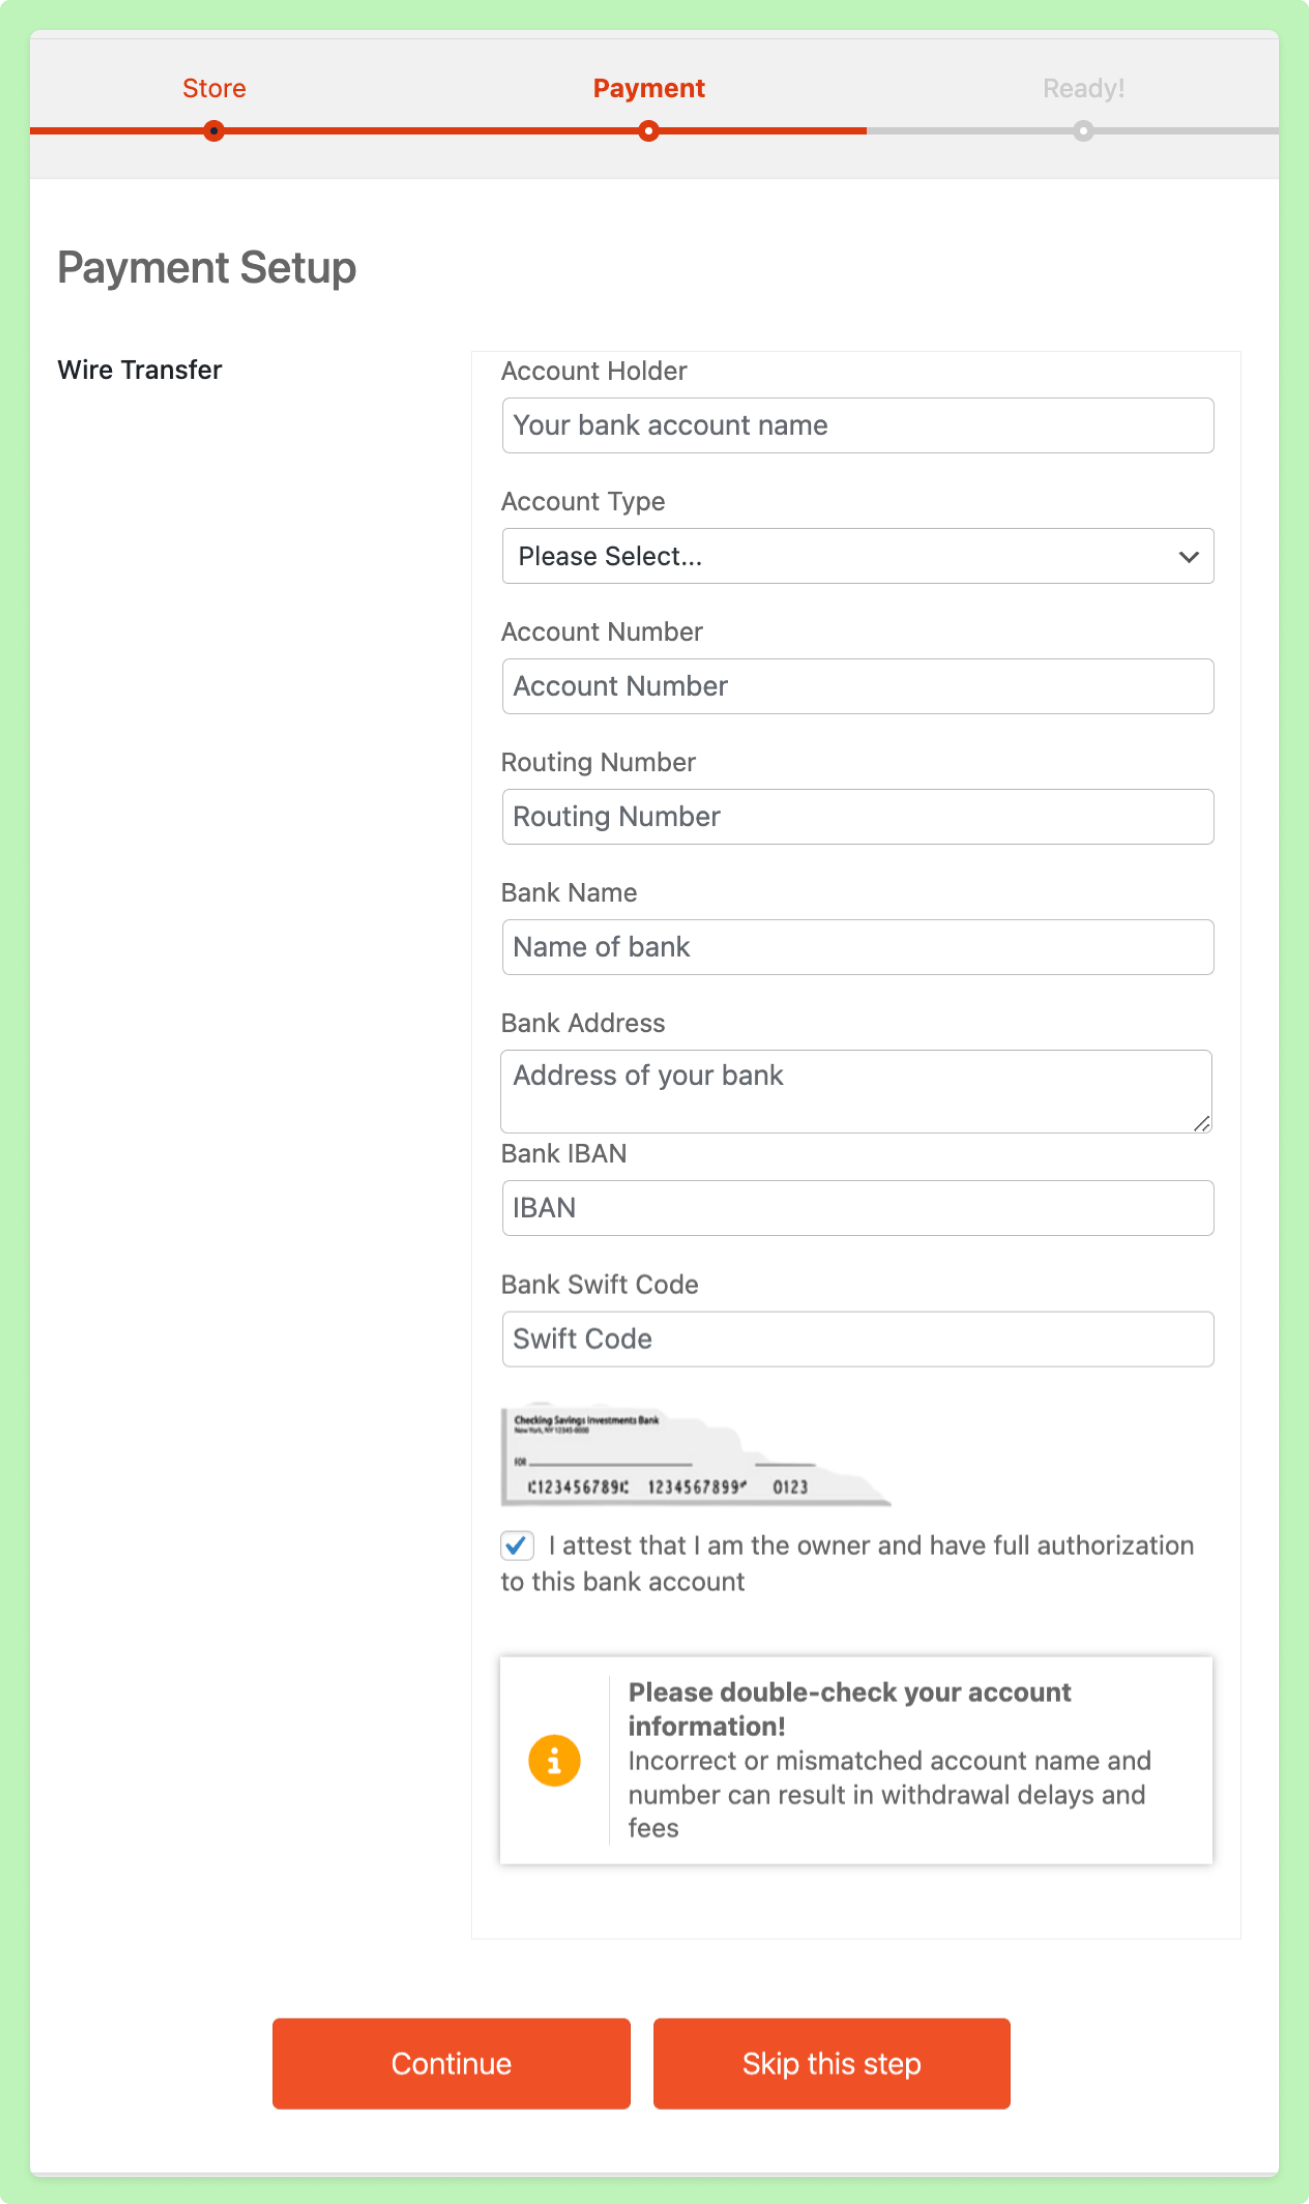 This is a screenshot of the bank payment field